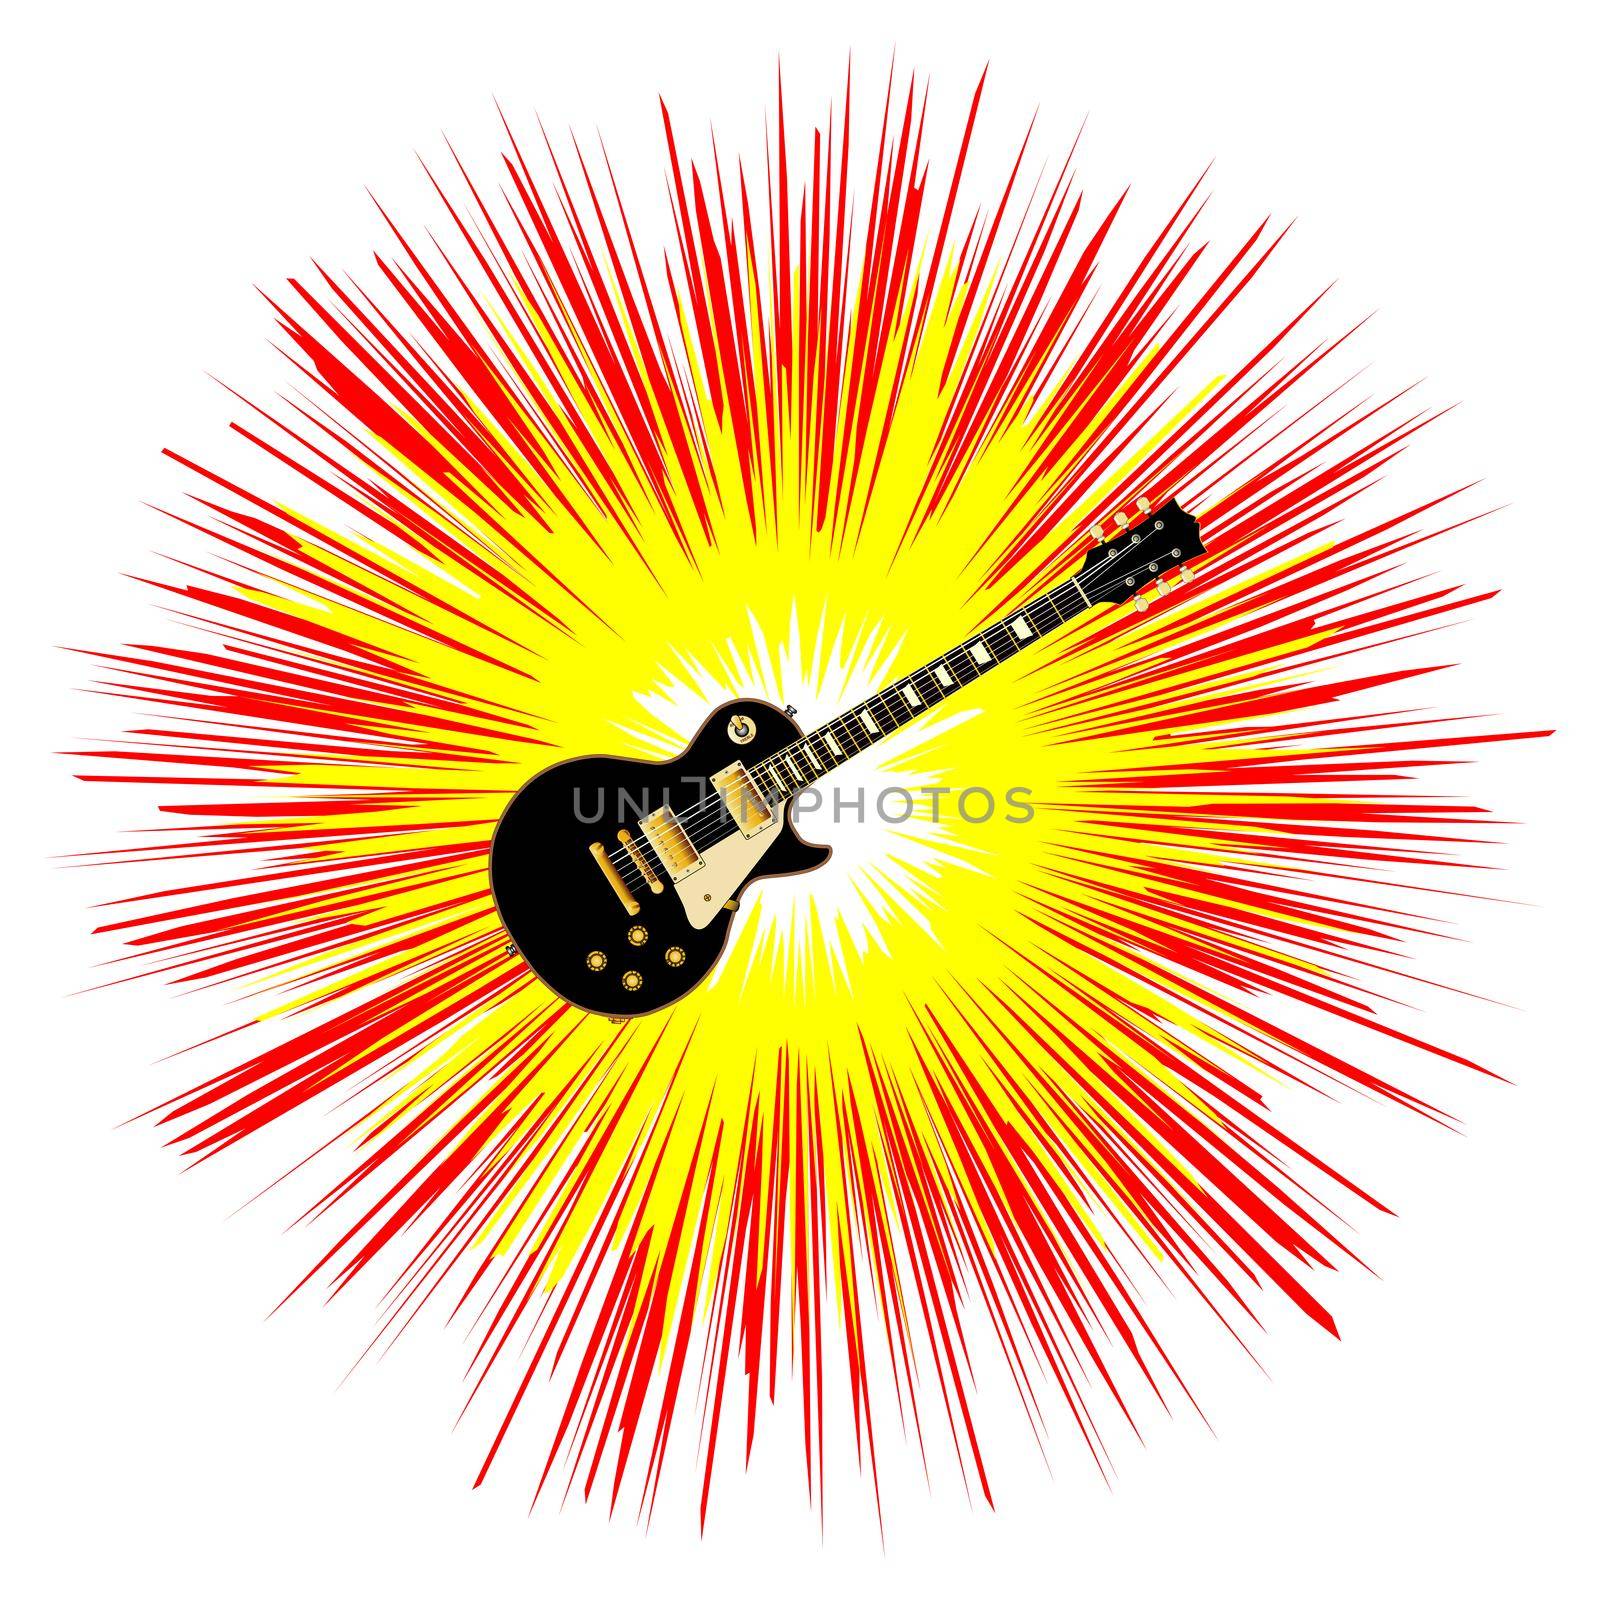 The definitive rock and roll guitar in black with bright flash background